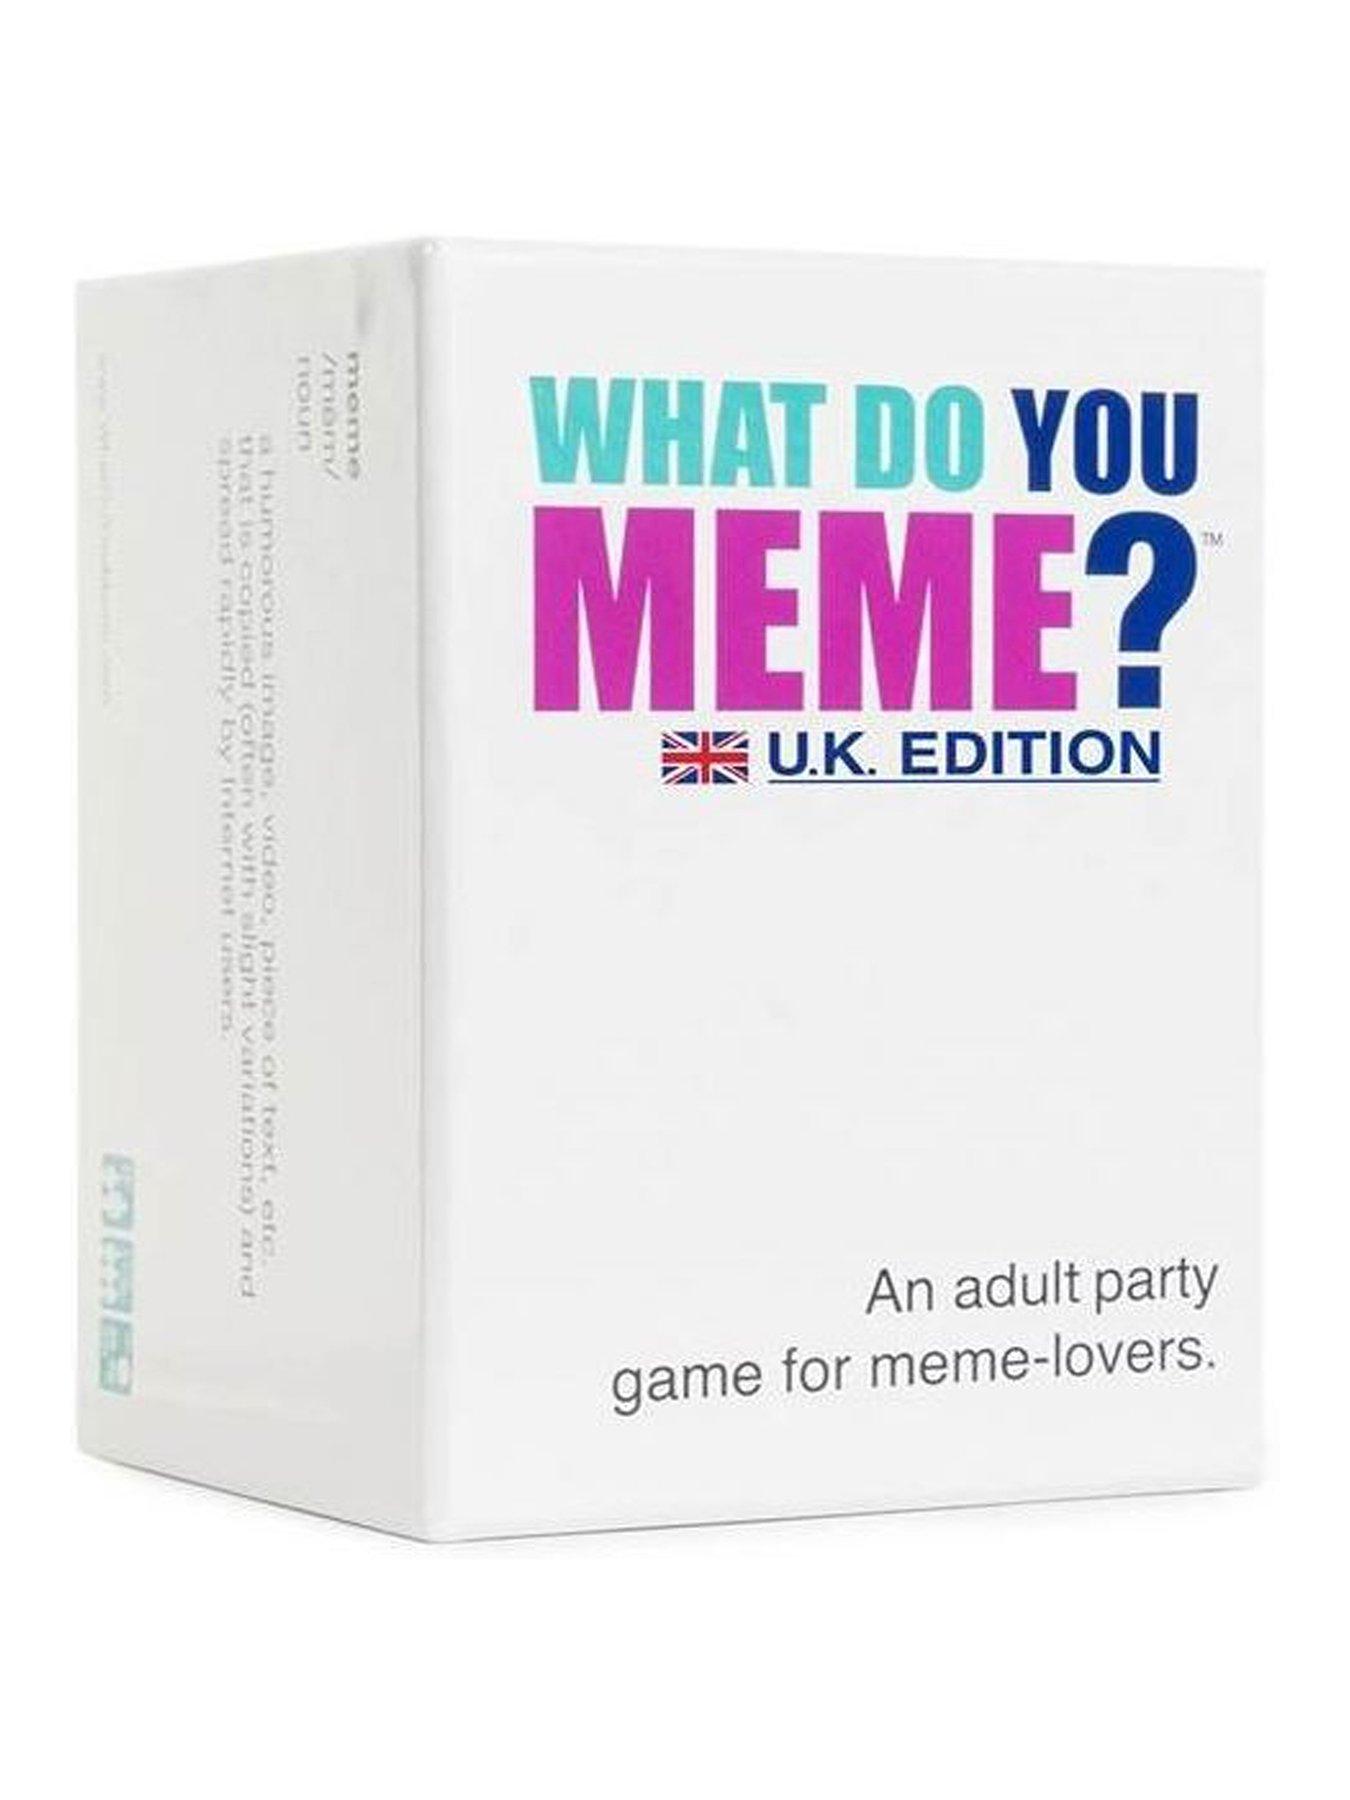  WHAT DO YOU MEME? Incohearent - The Party Game Where You  Compete to Guess The Gibberish - Gifts for Party Hosts - Adult Card Games  for Game Night : Everything Else